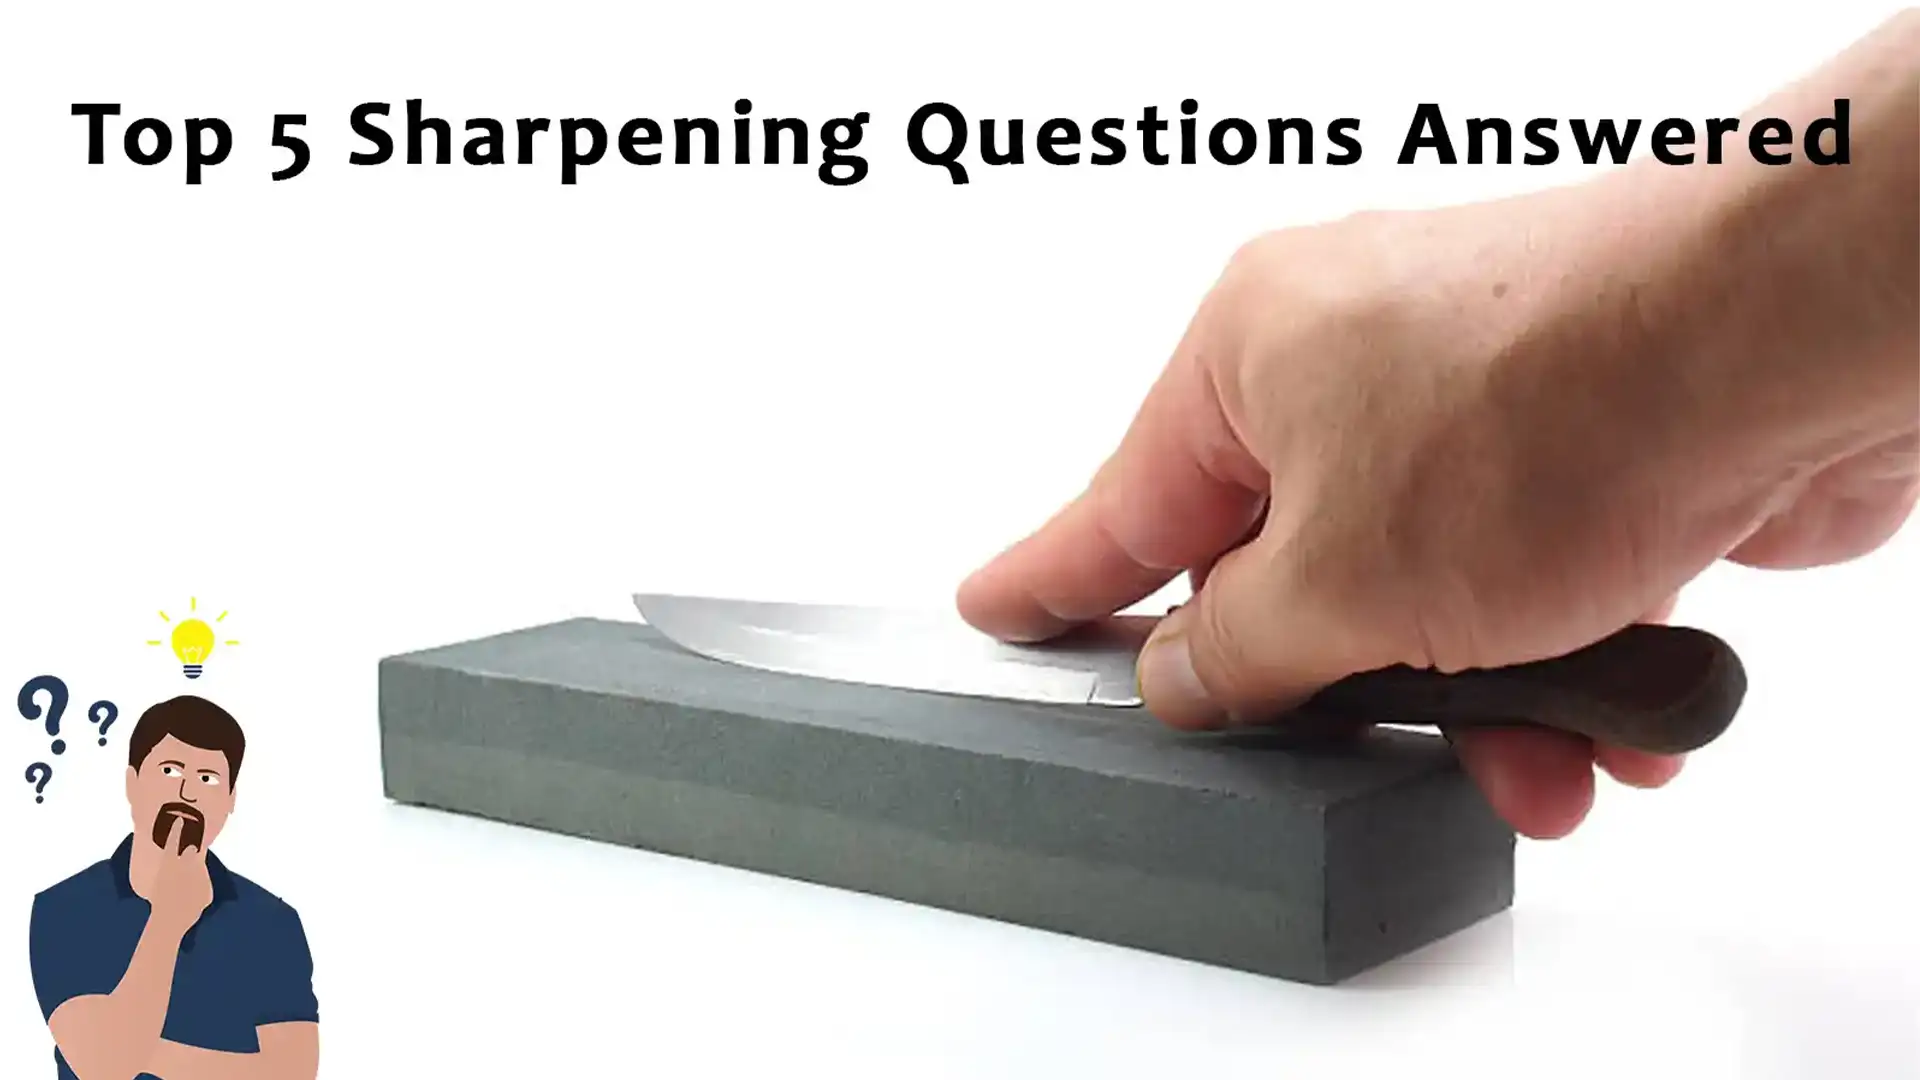 Top 5 Sharpening Questions Answered